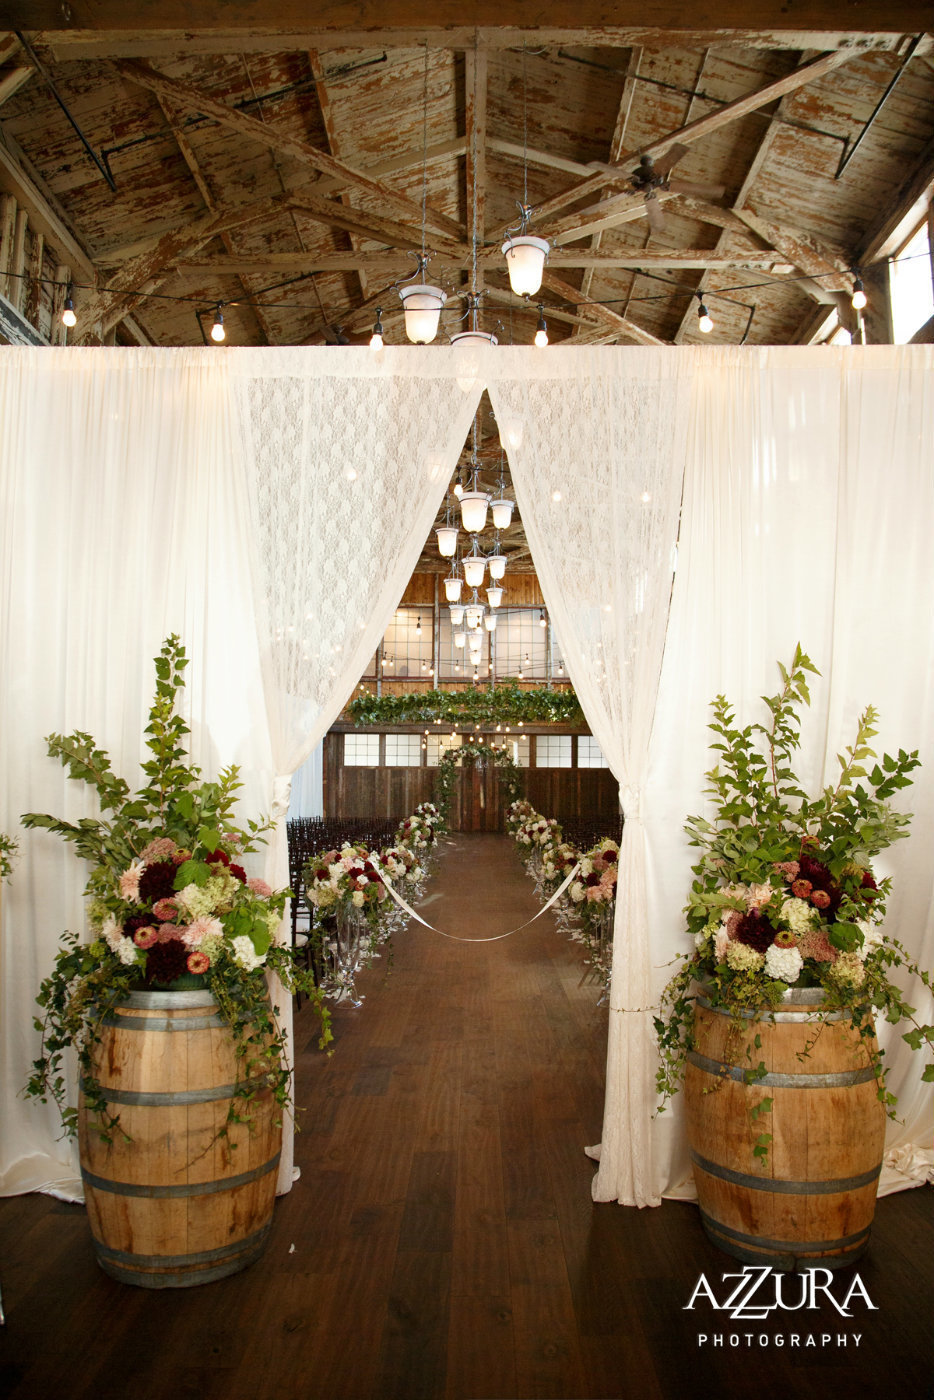 Sodo Park wedding ceremony entry decor with draping, barrels with large flower arrangements and welcome sign decorated in greenery vines